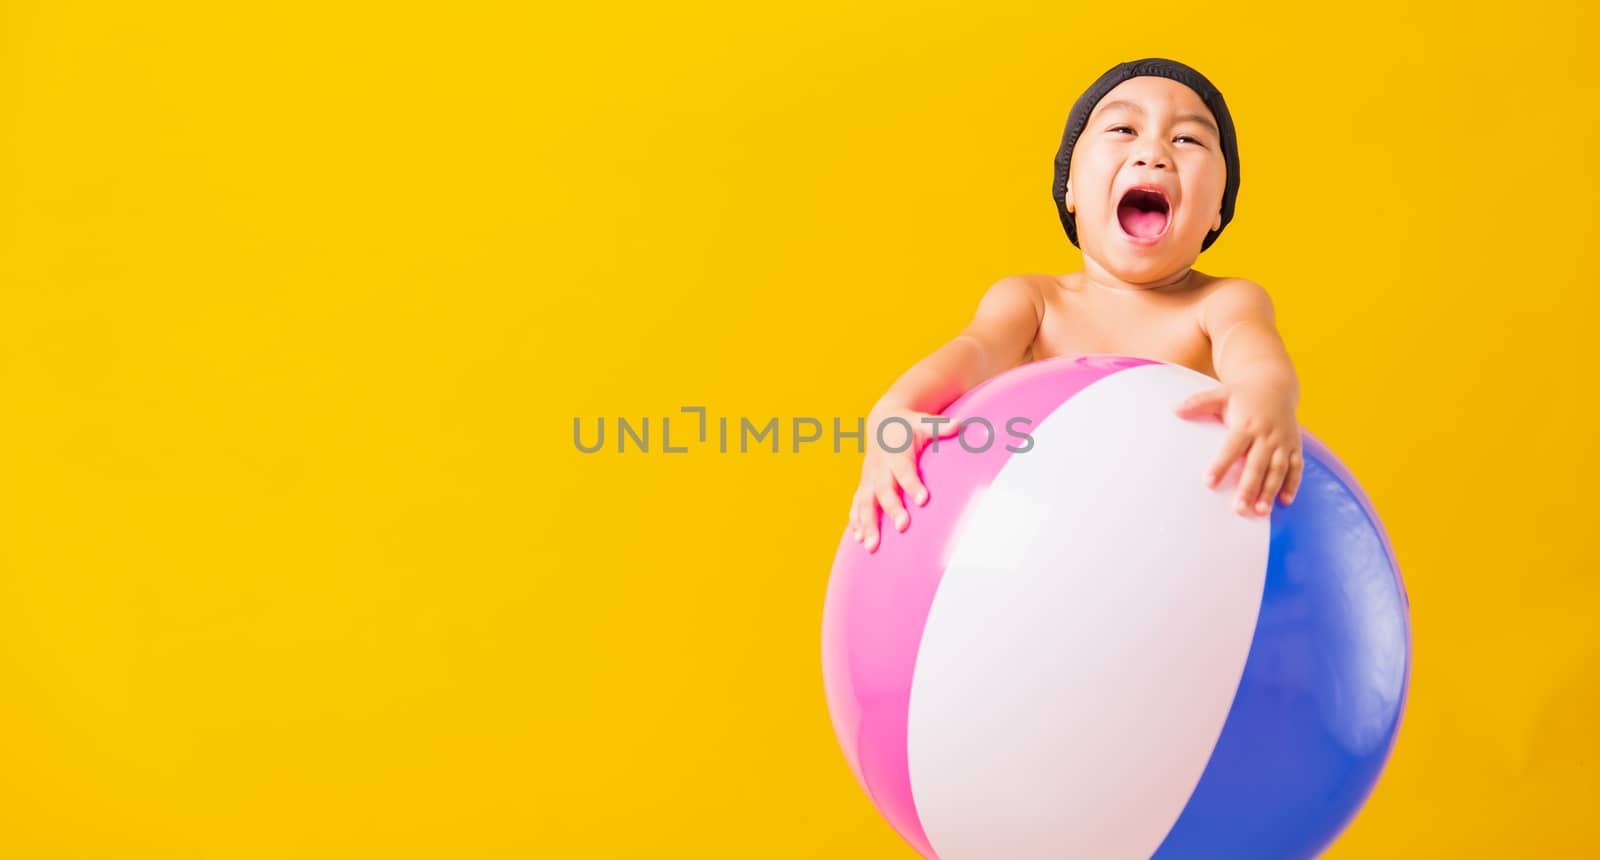 Summer vacation concept, Portrait Asian happy cute little child boy smiling in swimsuit hold beach ball, Kid having fun with inflatable ball in summer vacation, studio shot isolated yellow background